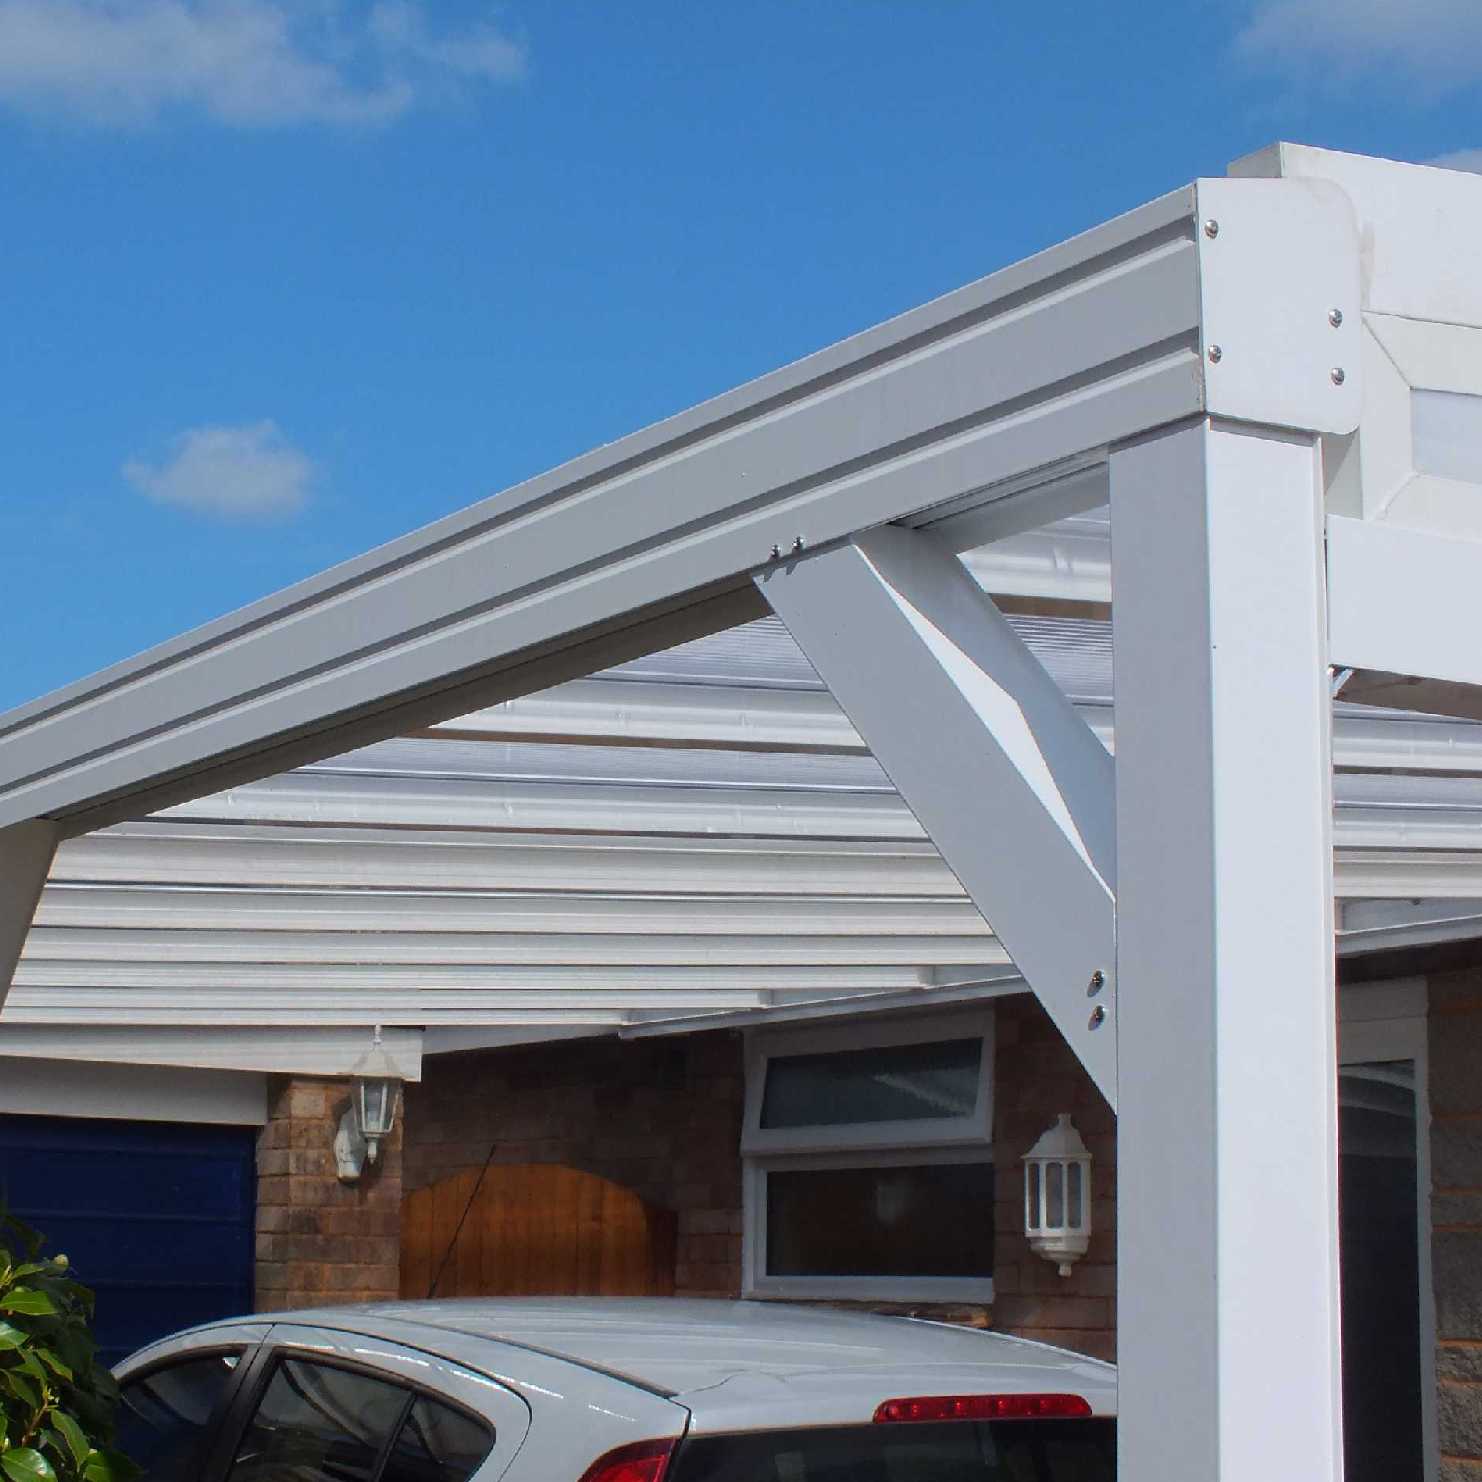 Great deals on Omega Smart Lean-To Canopy, White with 16mm Polycarbonate Glazing - 6.0m (W) x 2.0m (P), (3) Supporting Posts